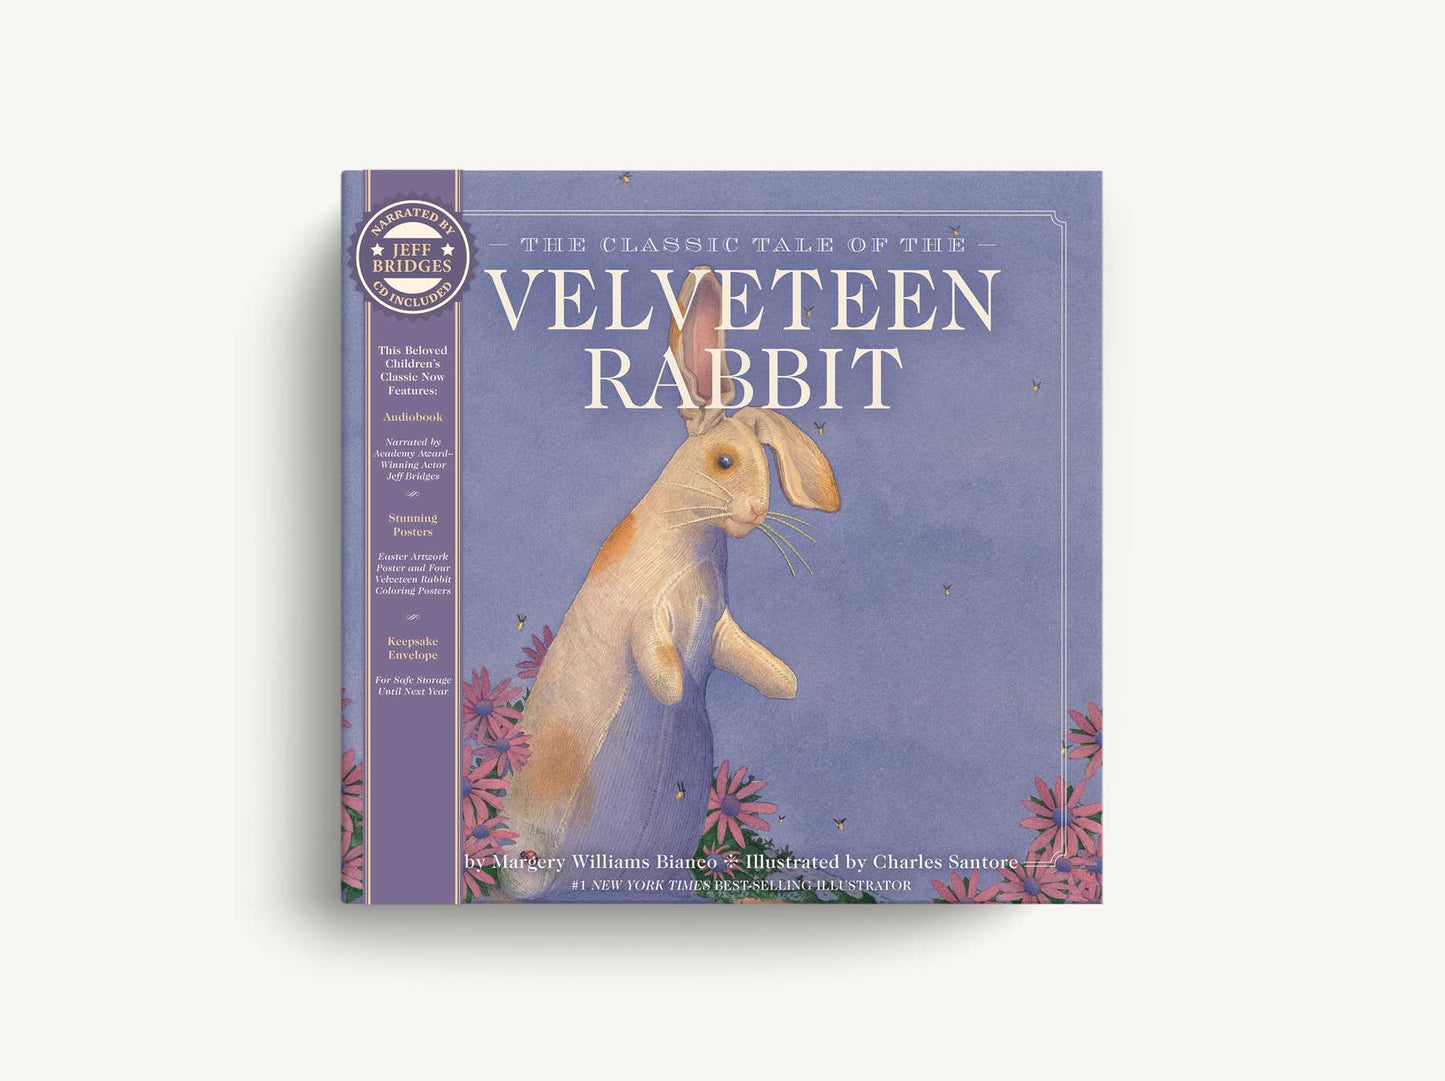 The Velveteen Rabbit Heirloom Edition: The Classic Edition Hardcover with Audio CD Narrated by an Academy Award Winning actor